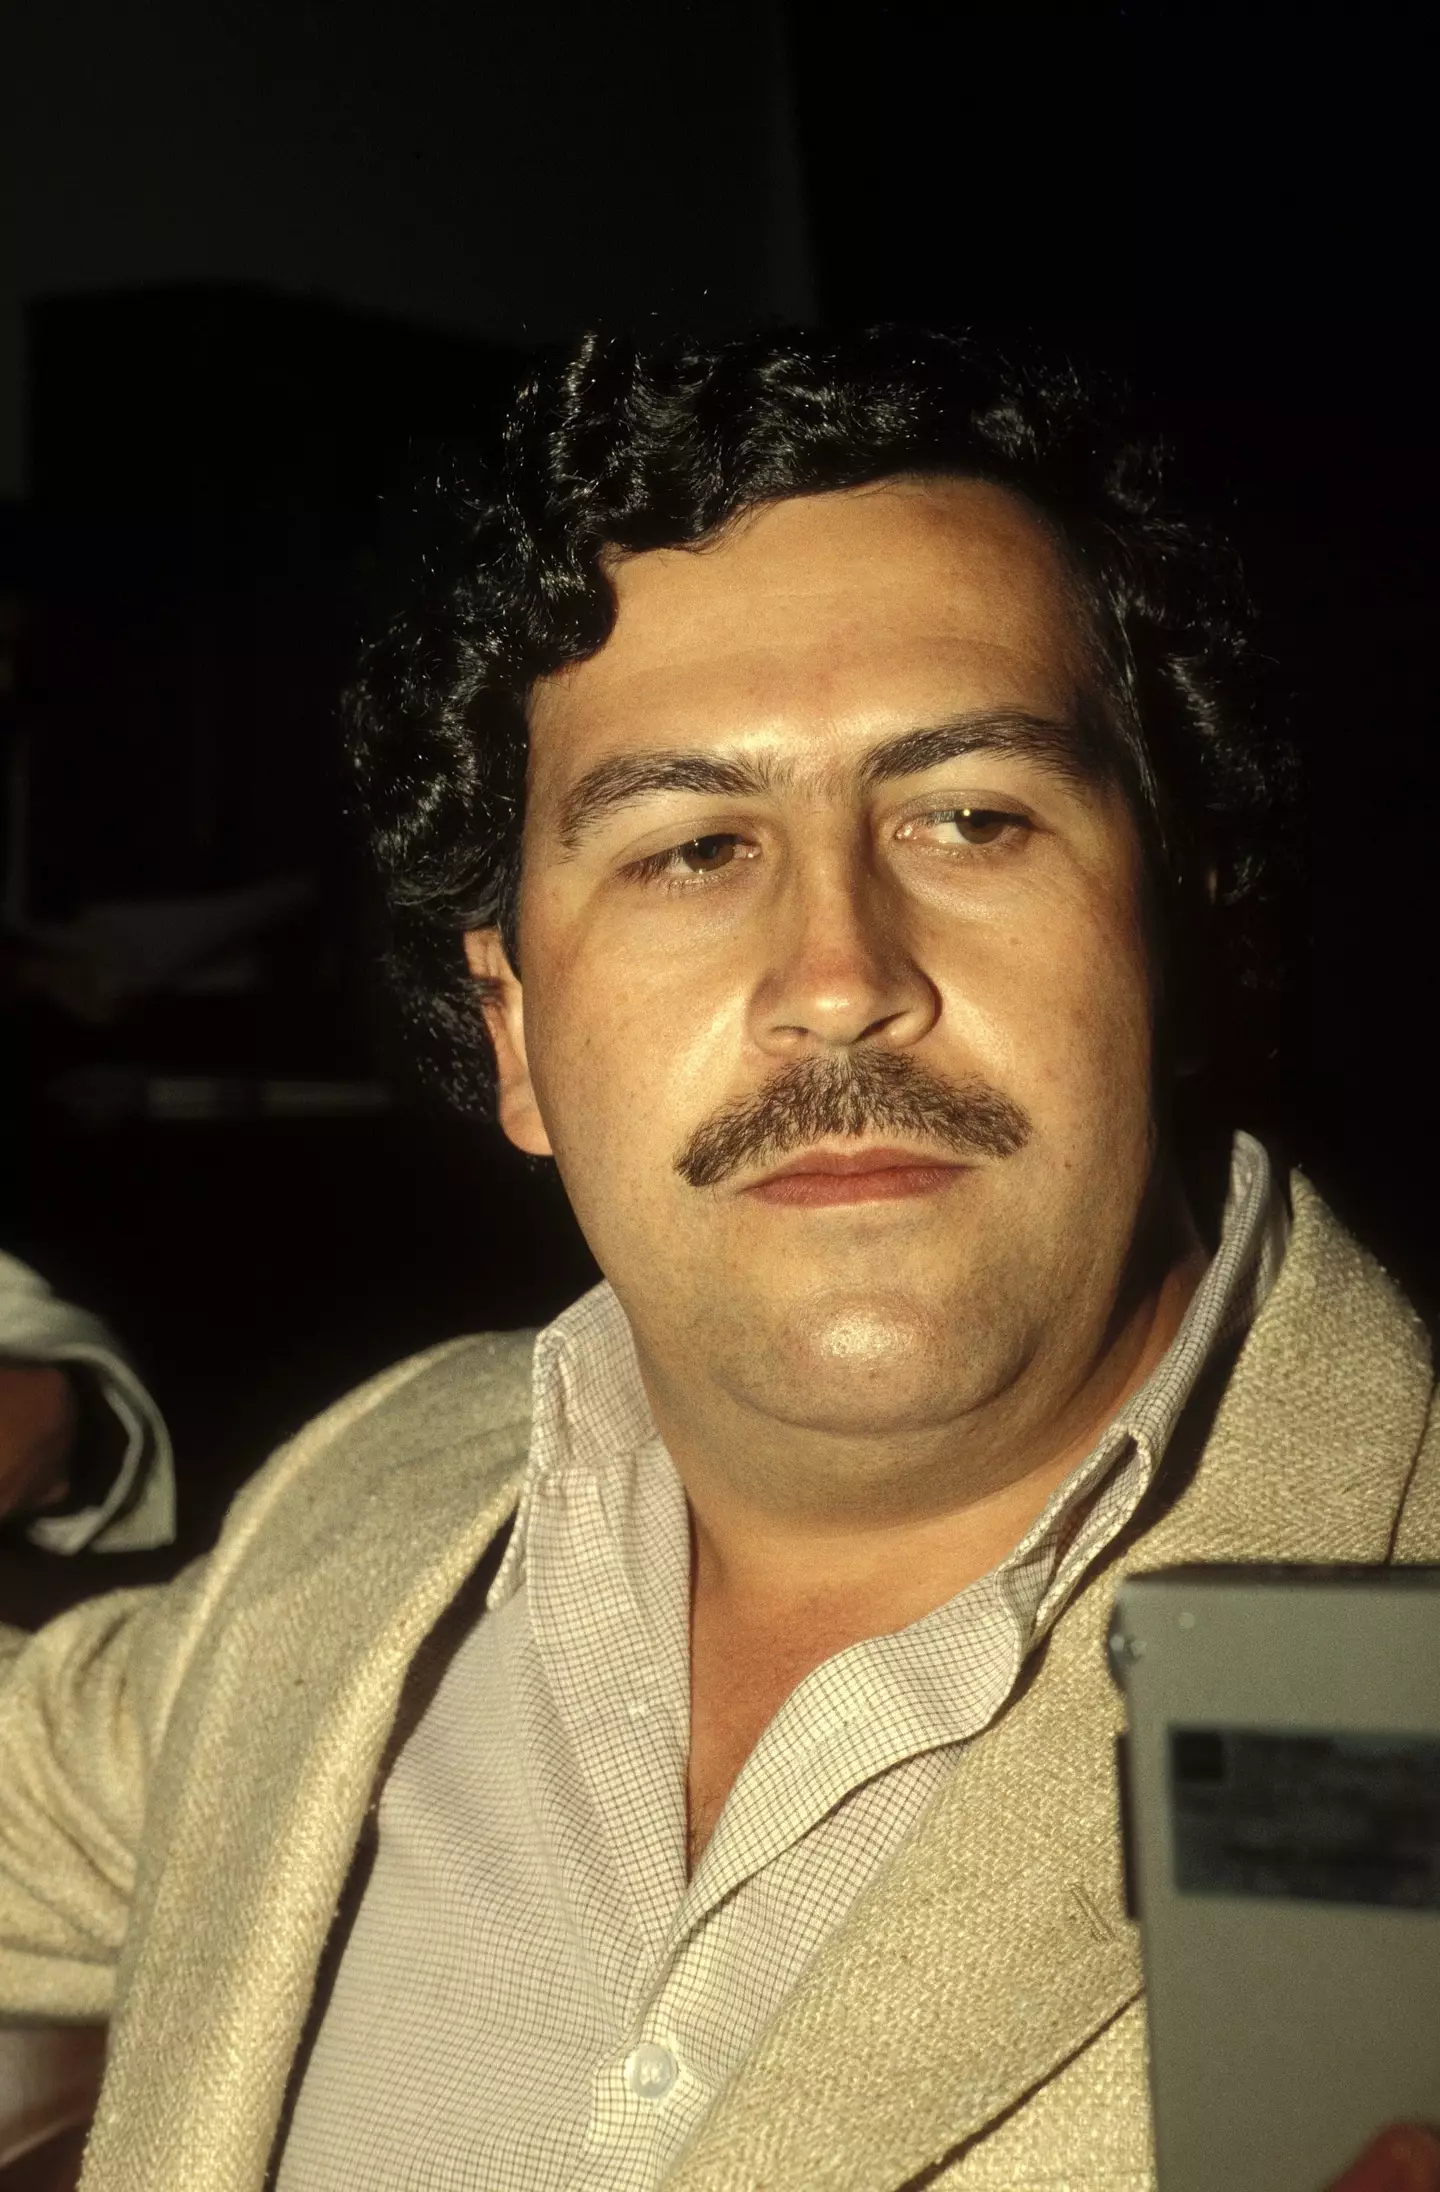 Pablo Escobar brought four hippos for his private zoo, their descendants have been named an invasive species.